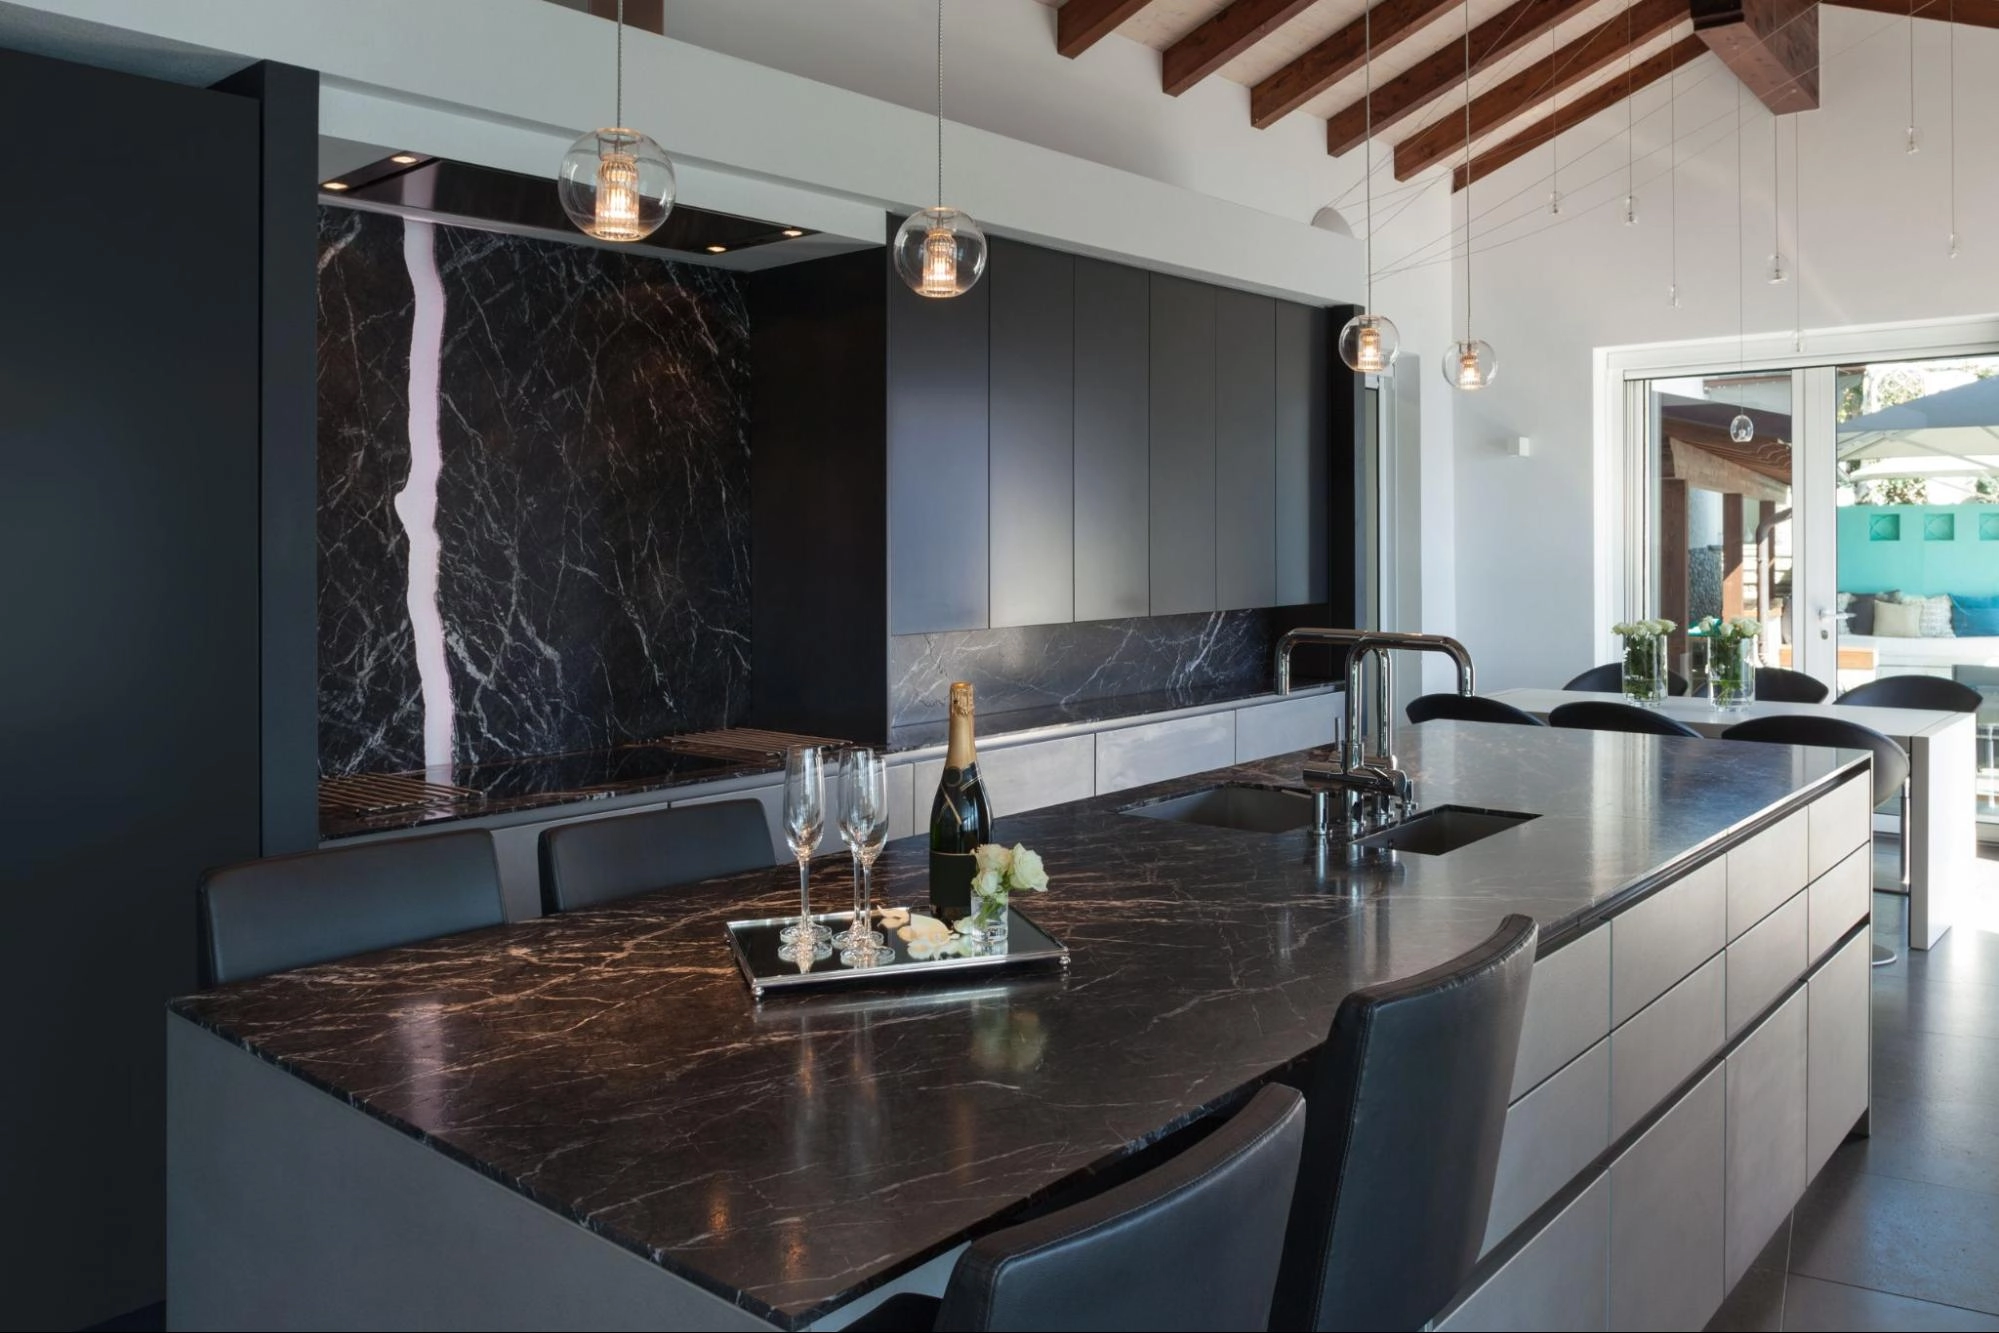 Page(/post/7-swoon-worthy-black-marble-kitchen-ideas)